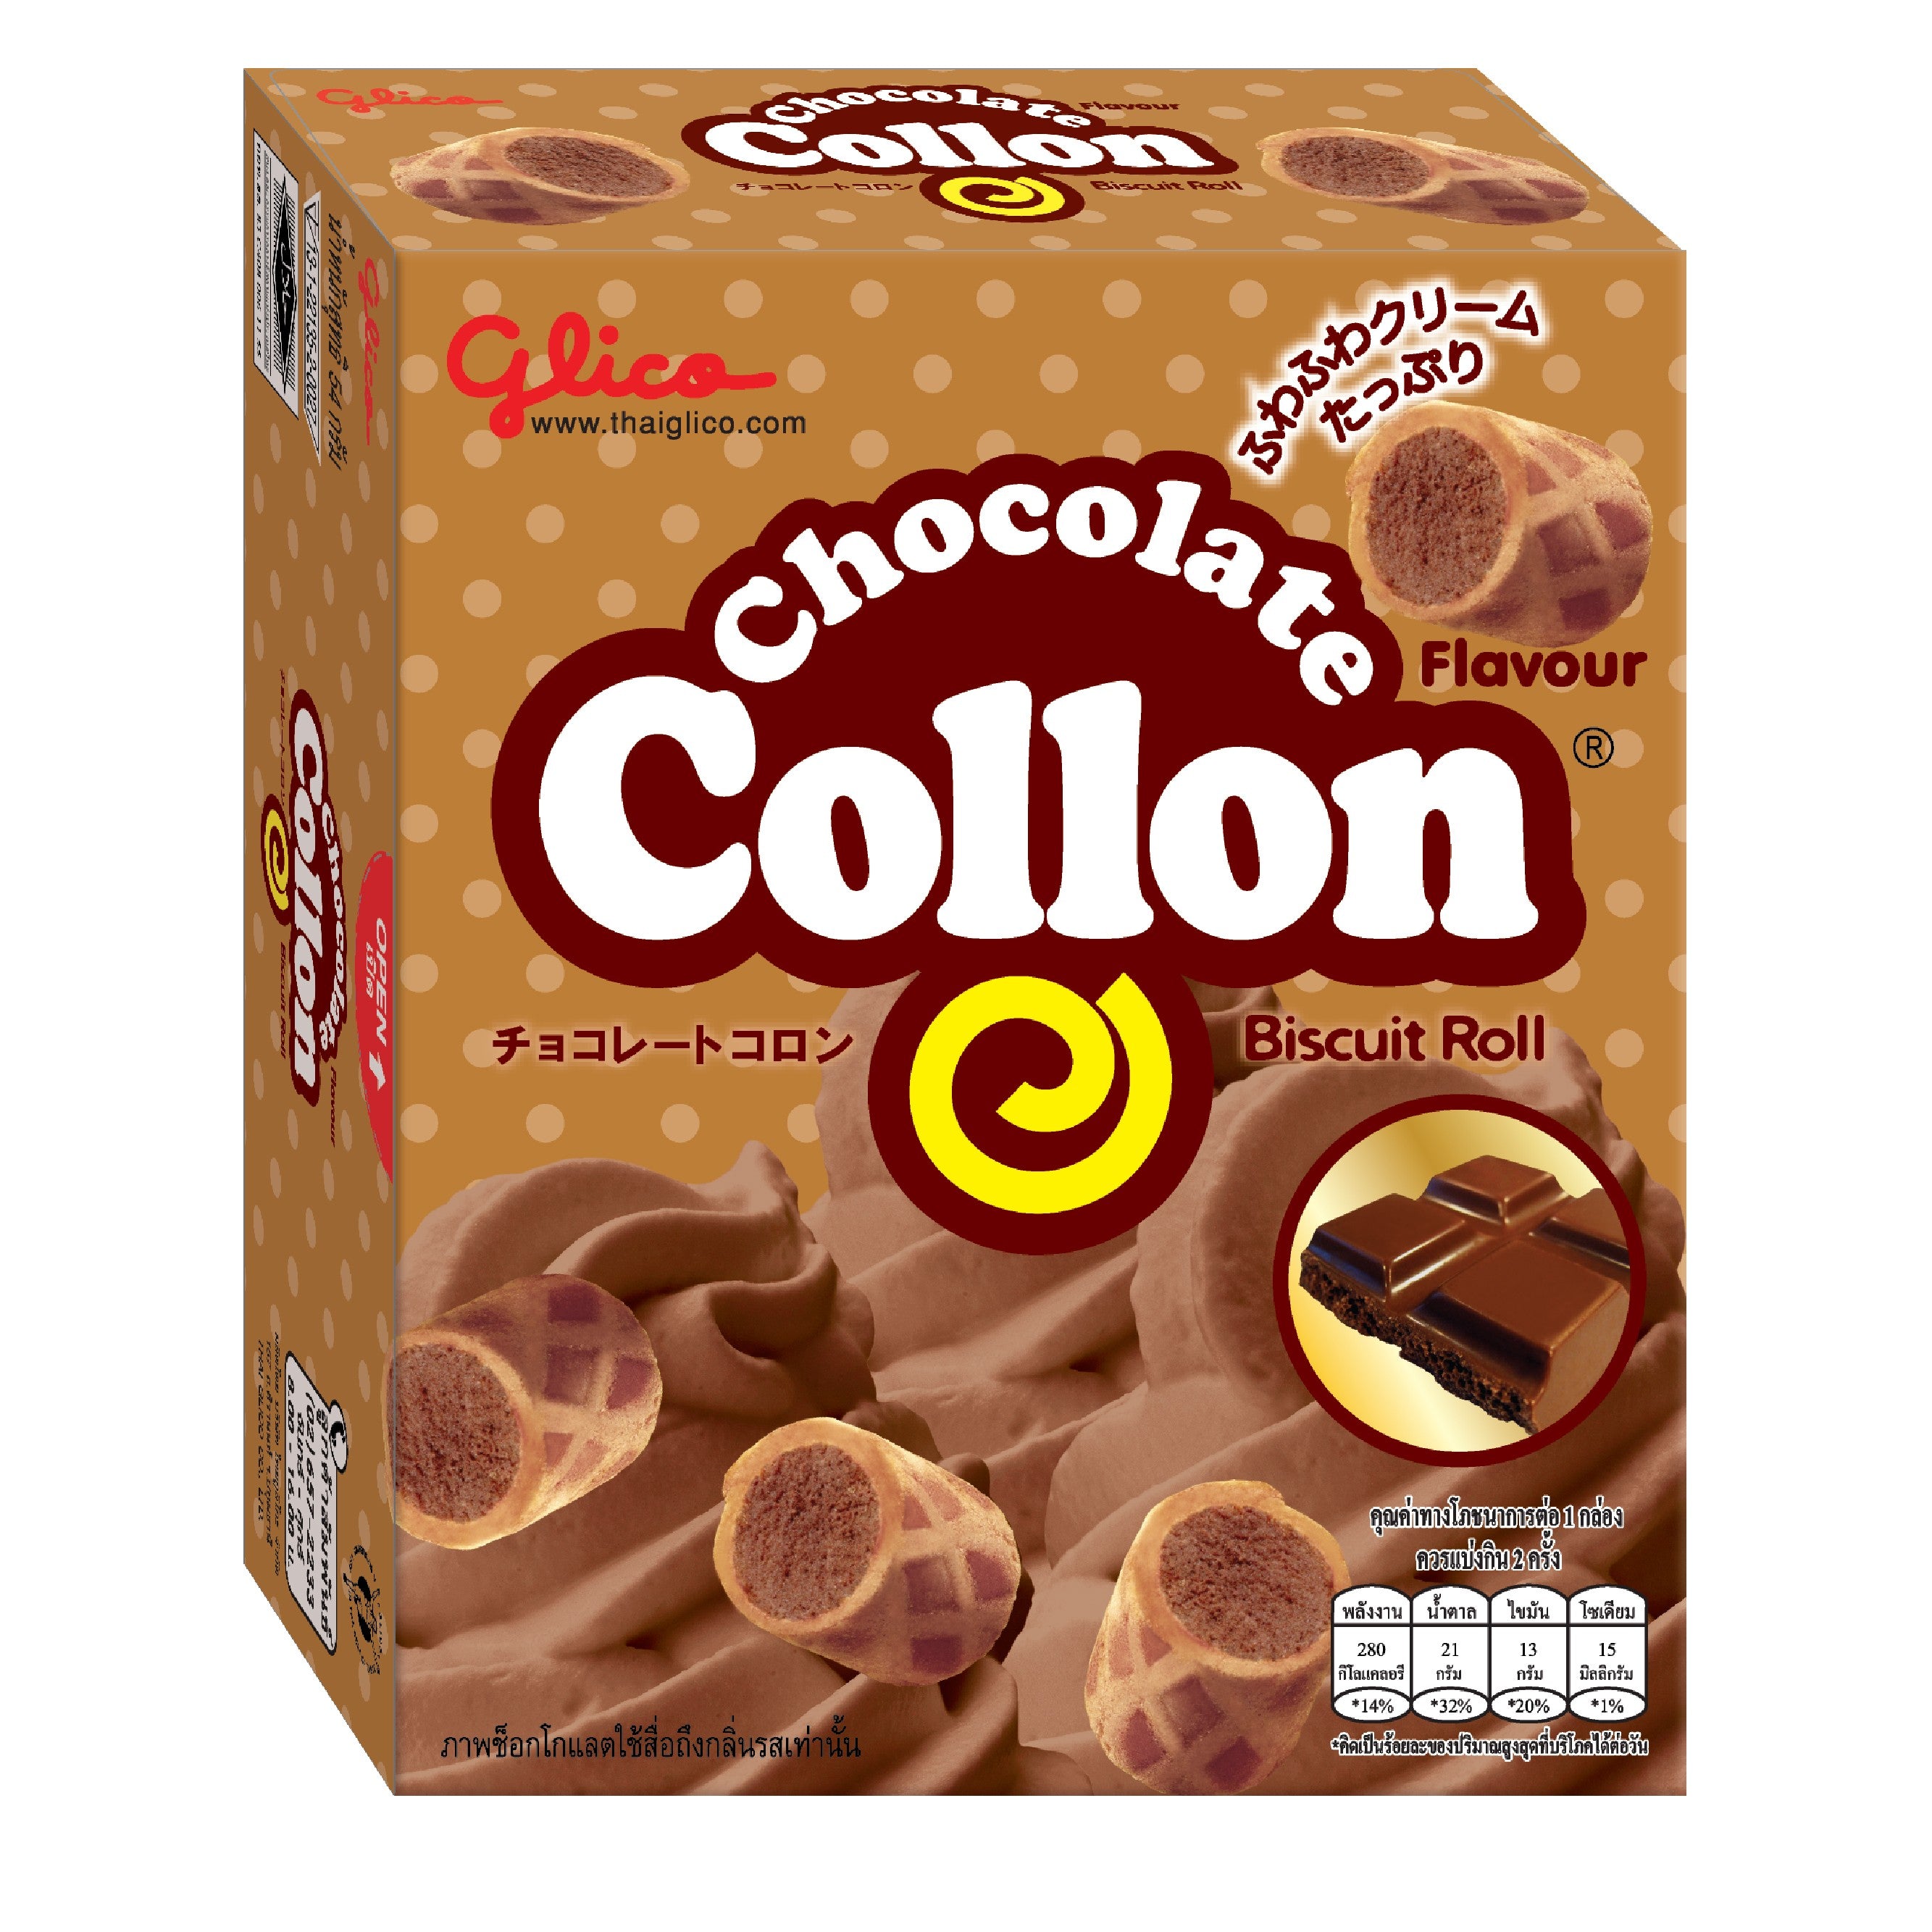 Collon Biscuit Roll Chocolate Flavour 54g by Glico